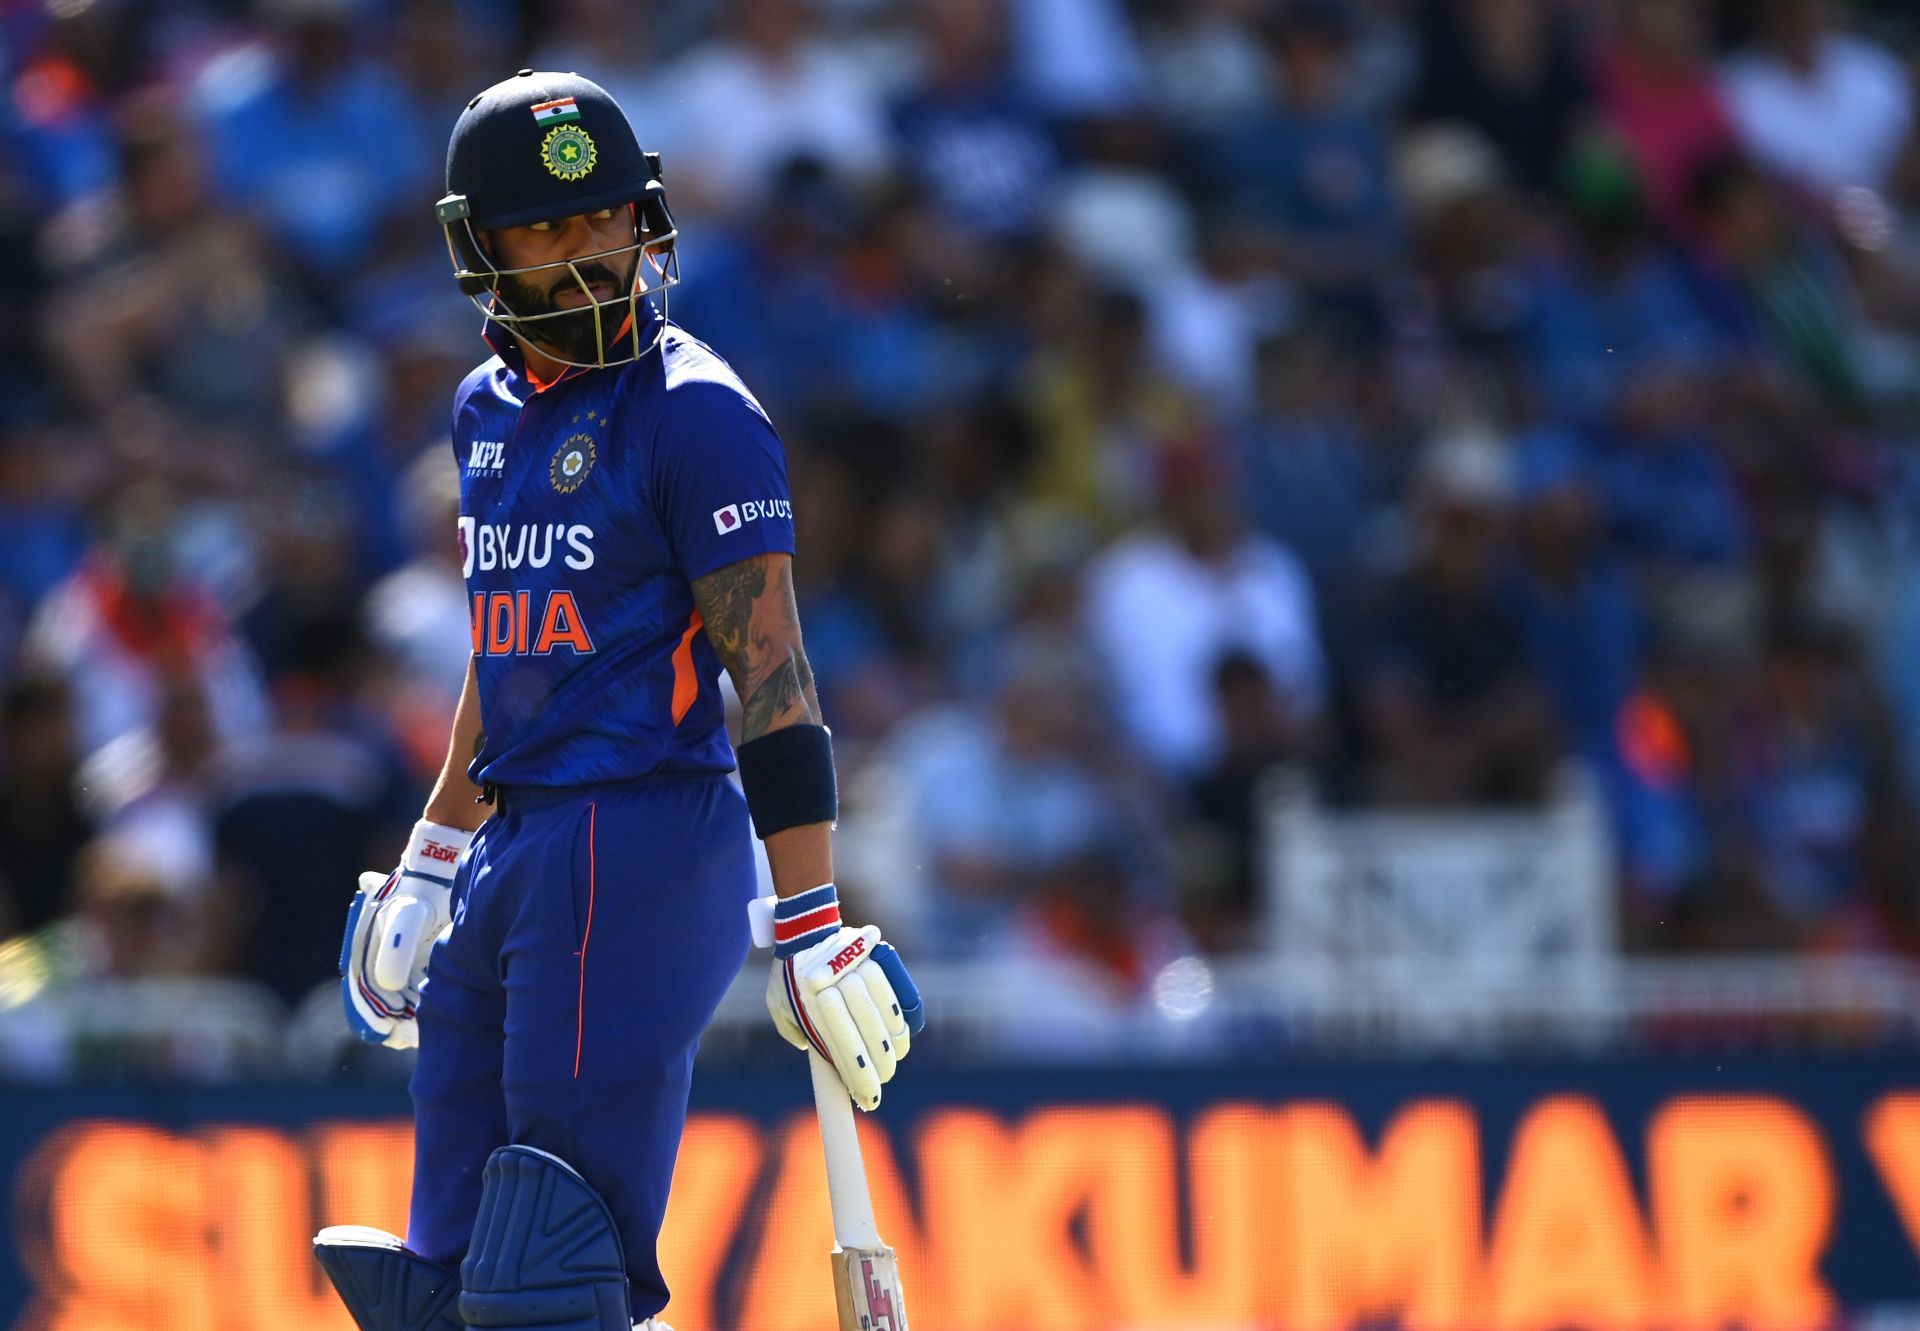 Virat Kohli has had an extended lean patch with the bat. (Image Credits: Getty)